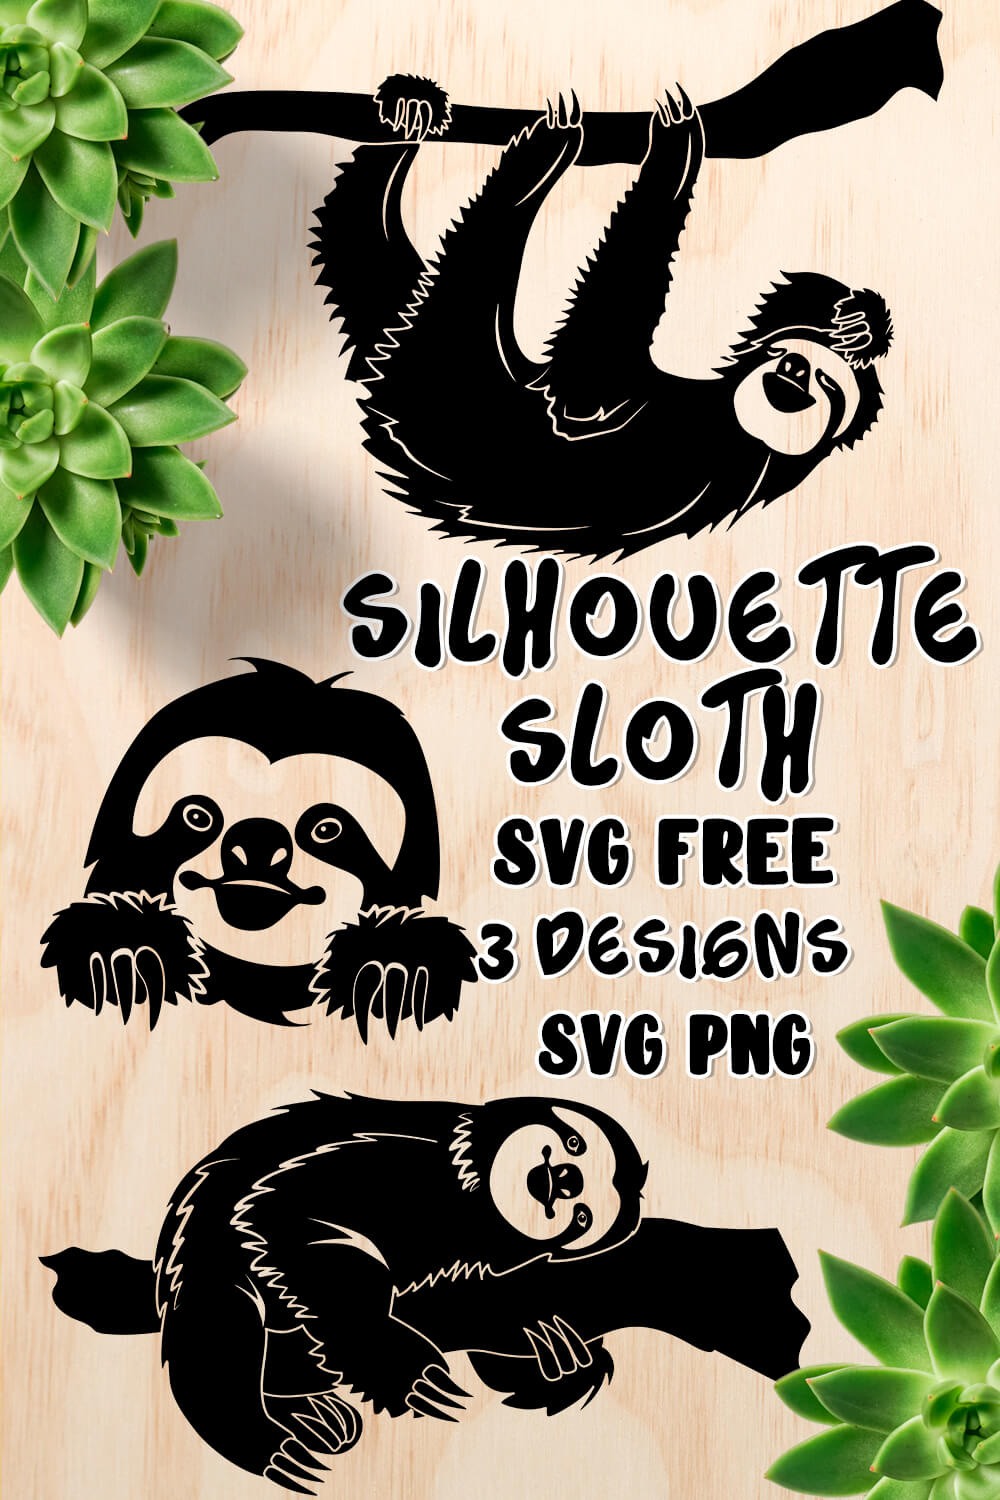 Black sloths are depicted on a beige background.